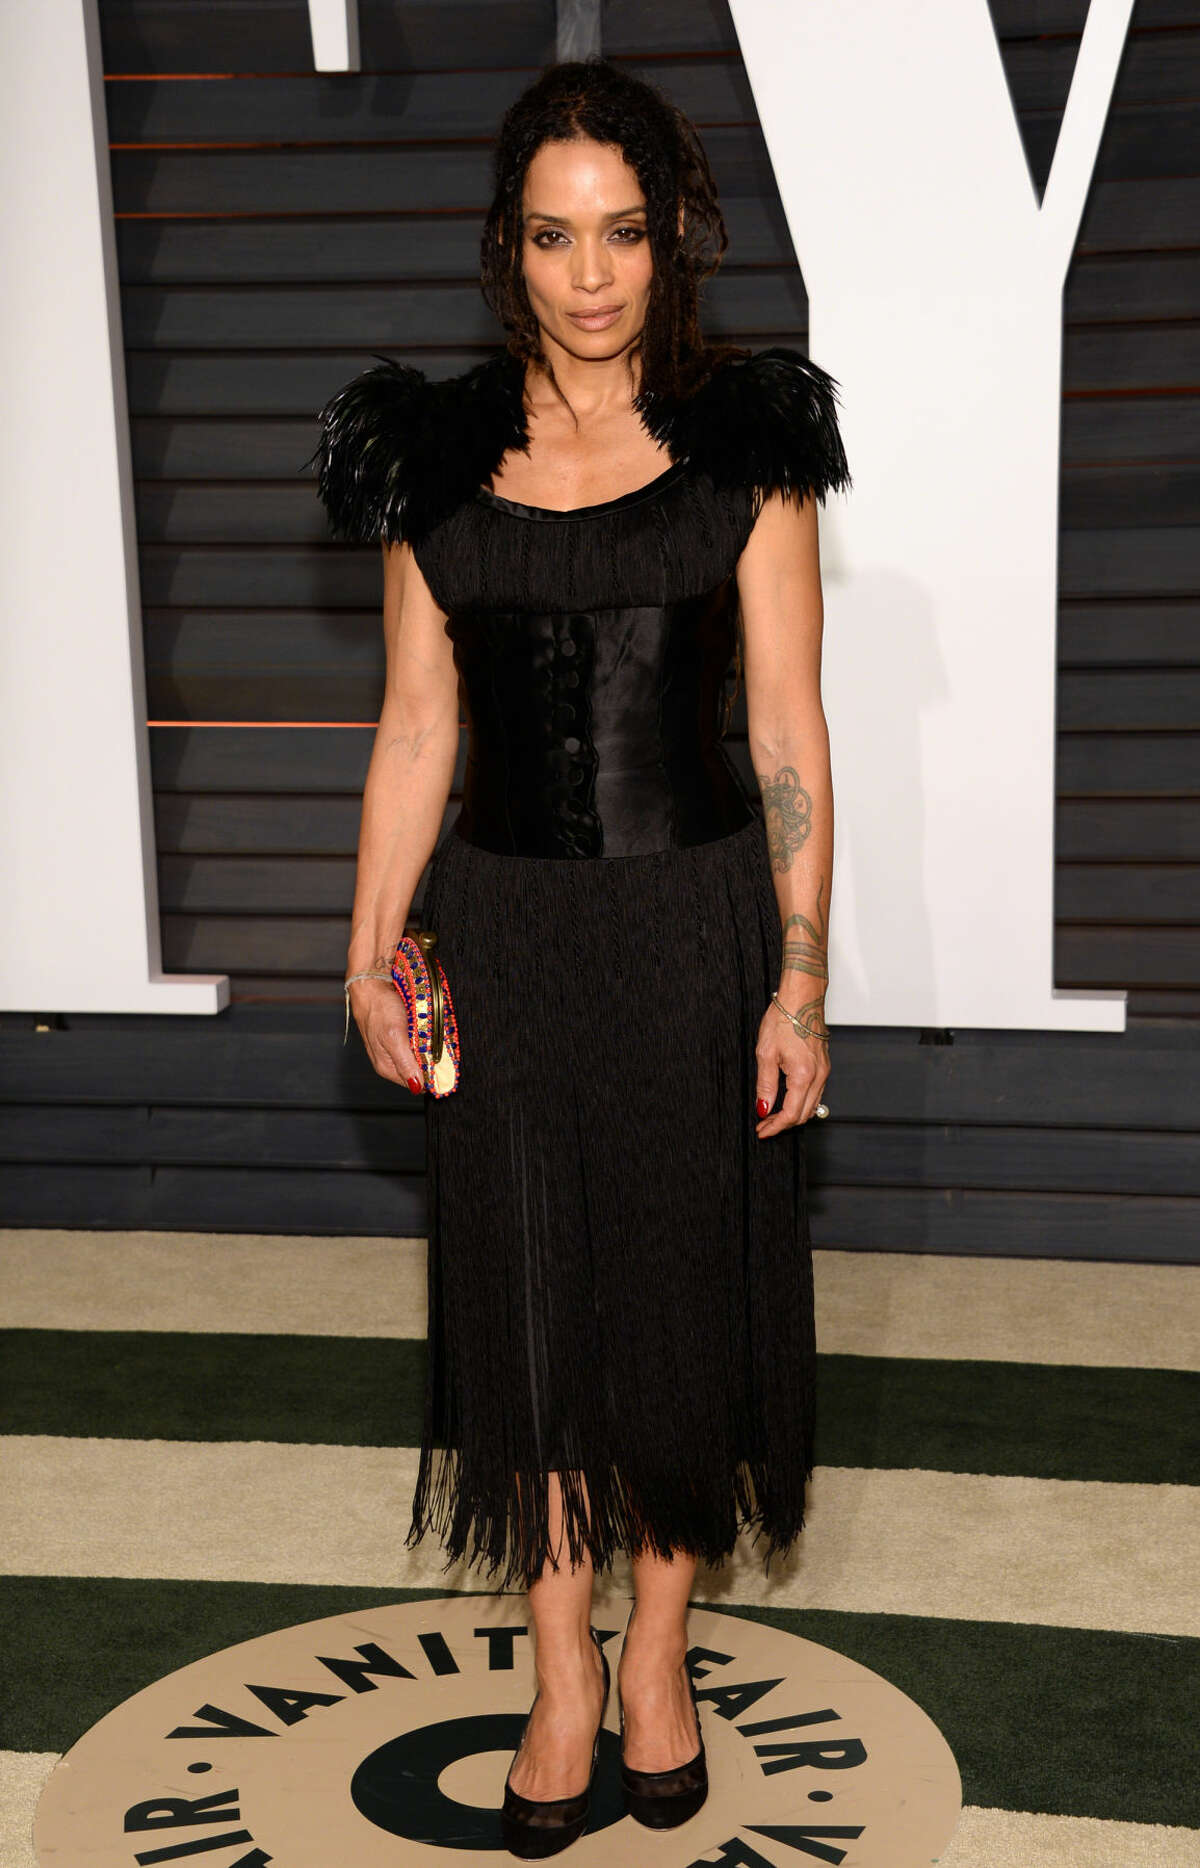 Lisa Bonet arrives at the 2015 Vanity Fair Oscar Party on Sunday, Feb. 22, 2015, in Beverly Hills, Calif. (Photo by Evan Agostini/Invision/AP)